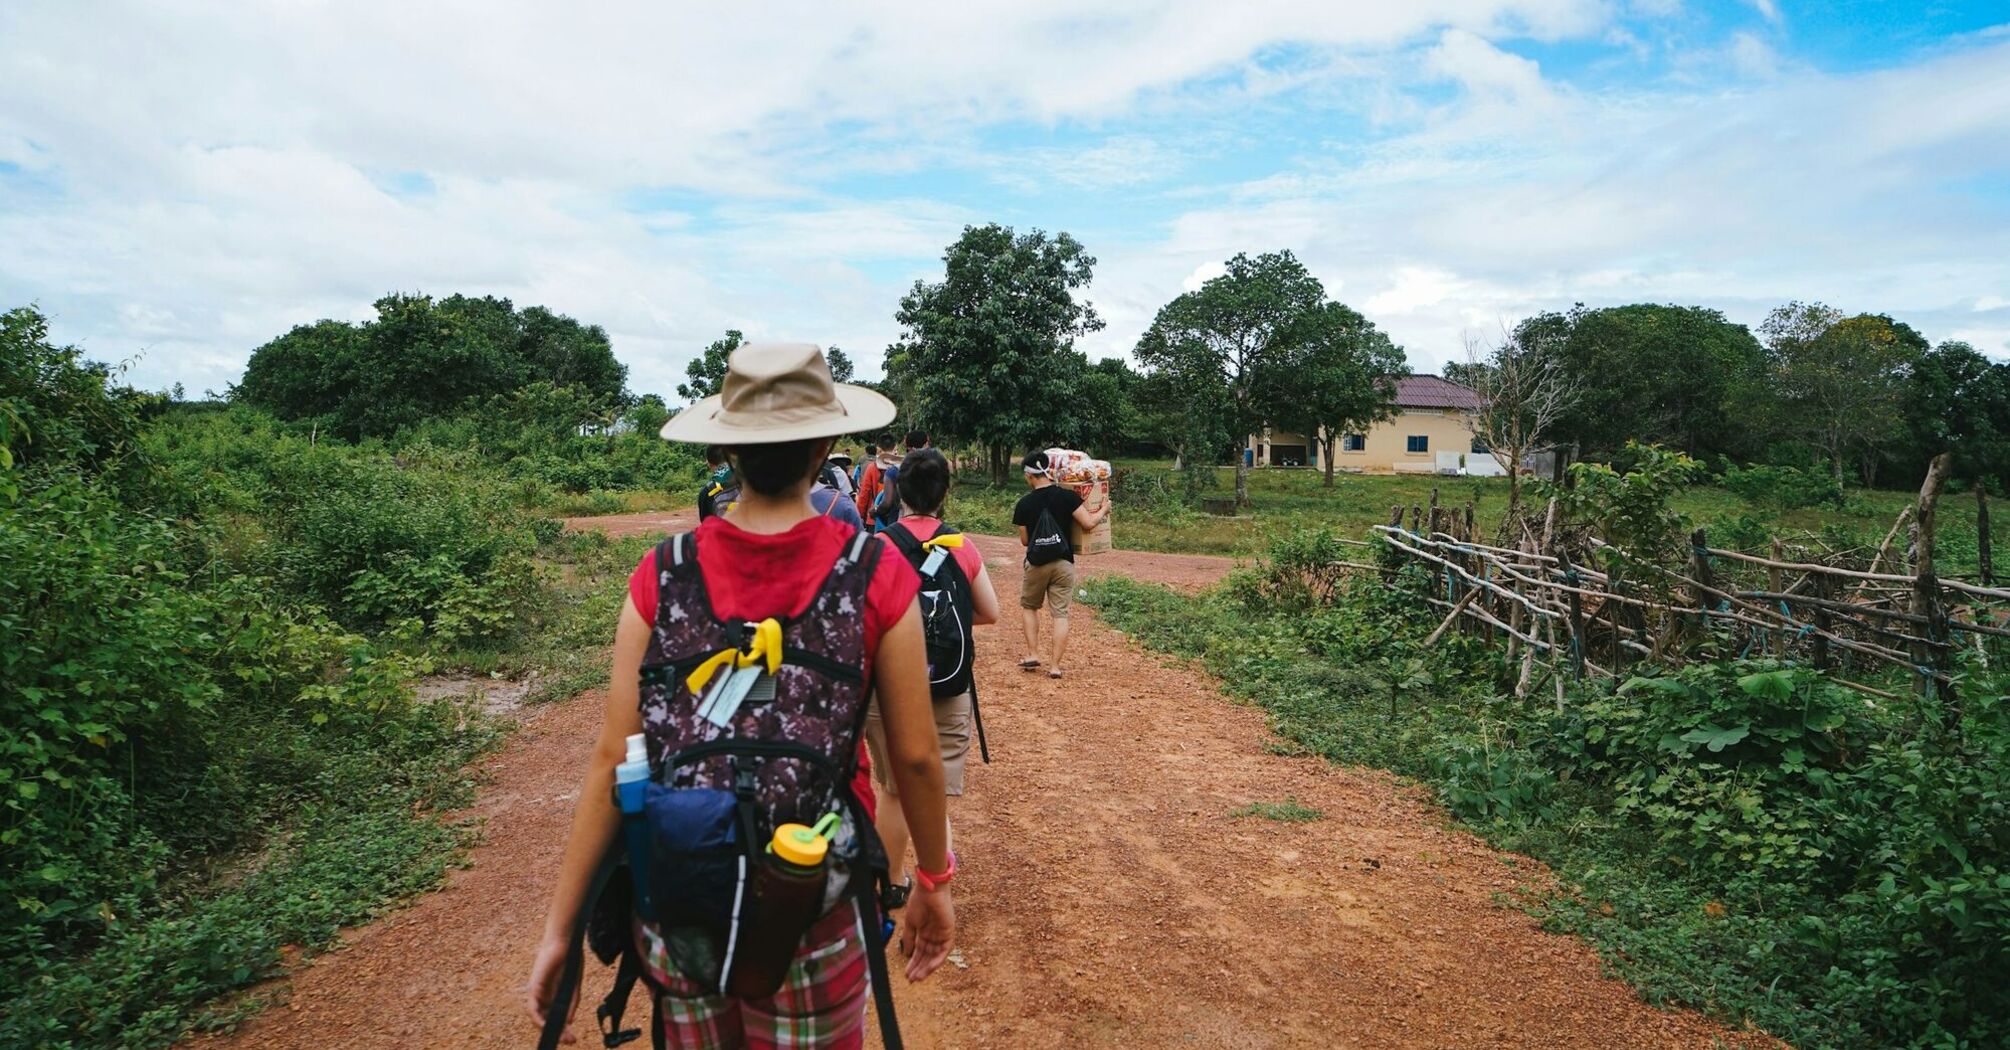 Tourists with backpacks walking on a rural path surrounded by greenery